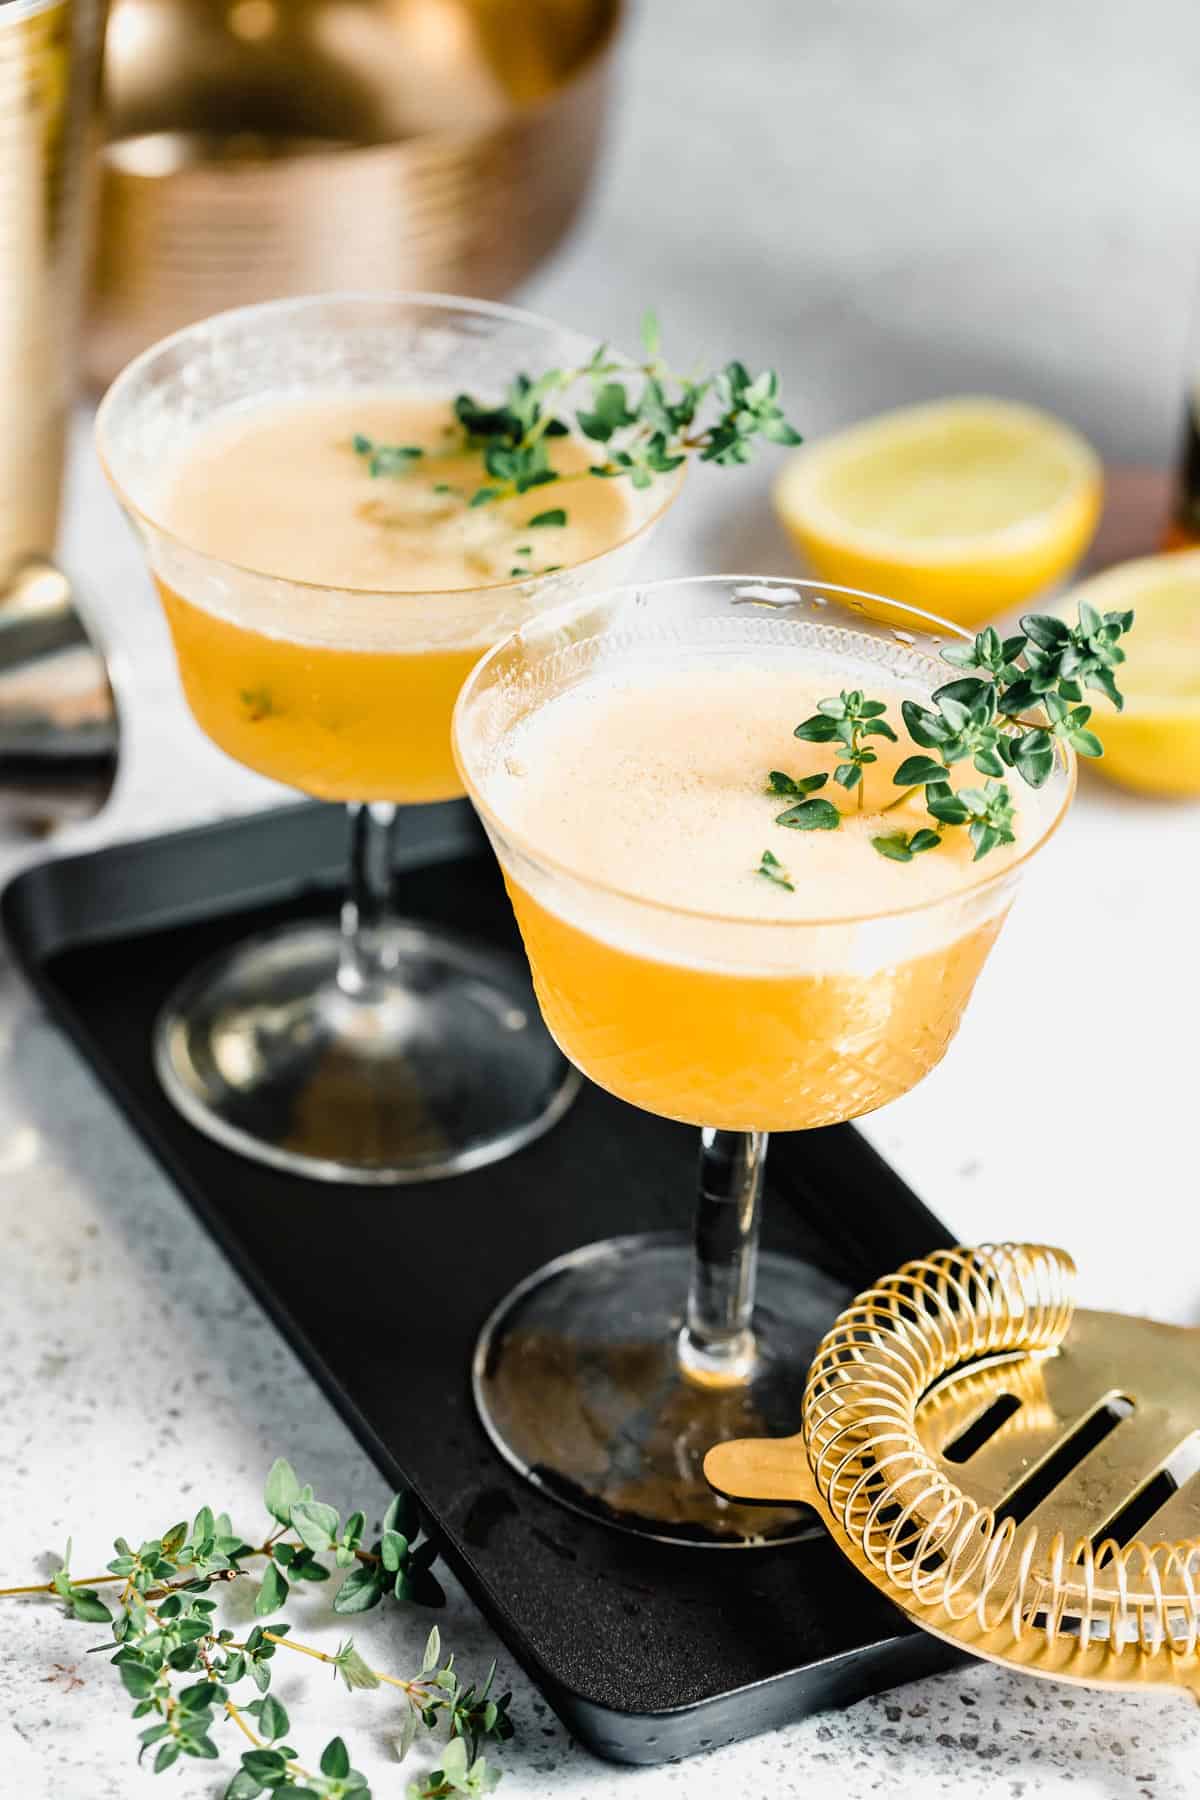 Two upscale drinks on a black serving tray garnished with fresh thyme.